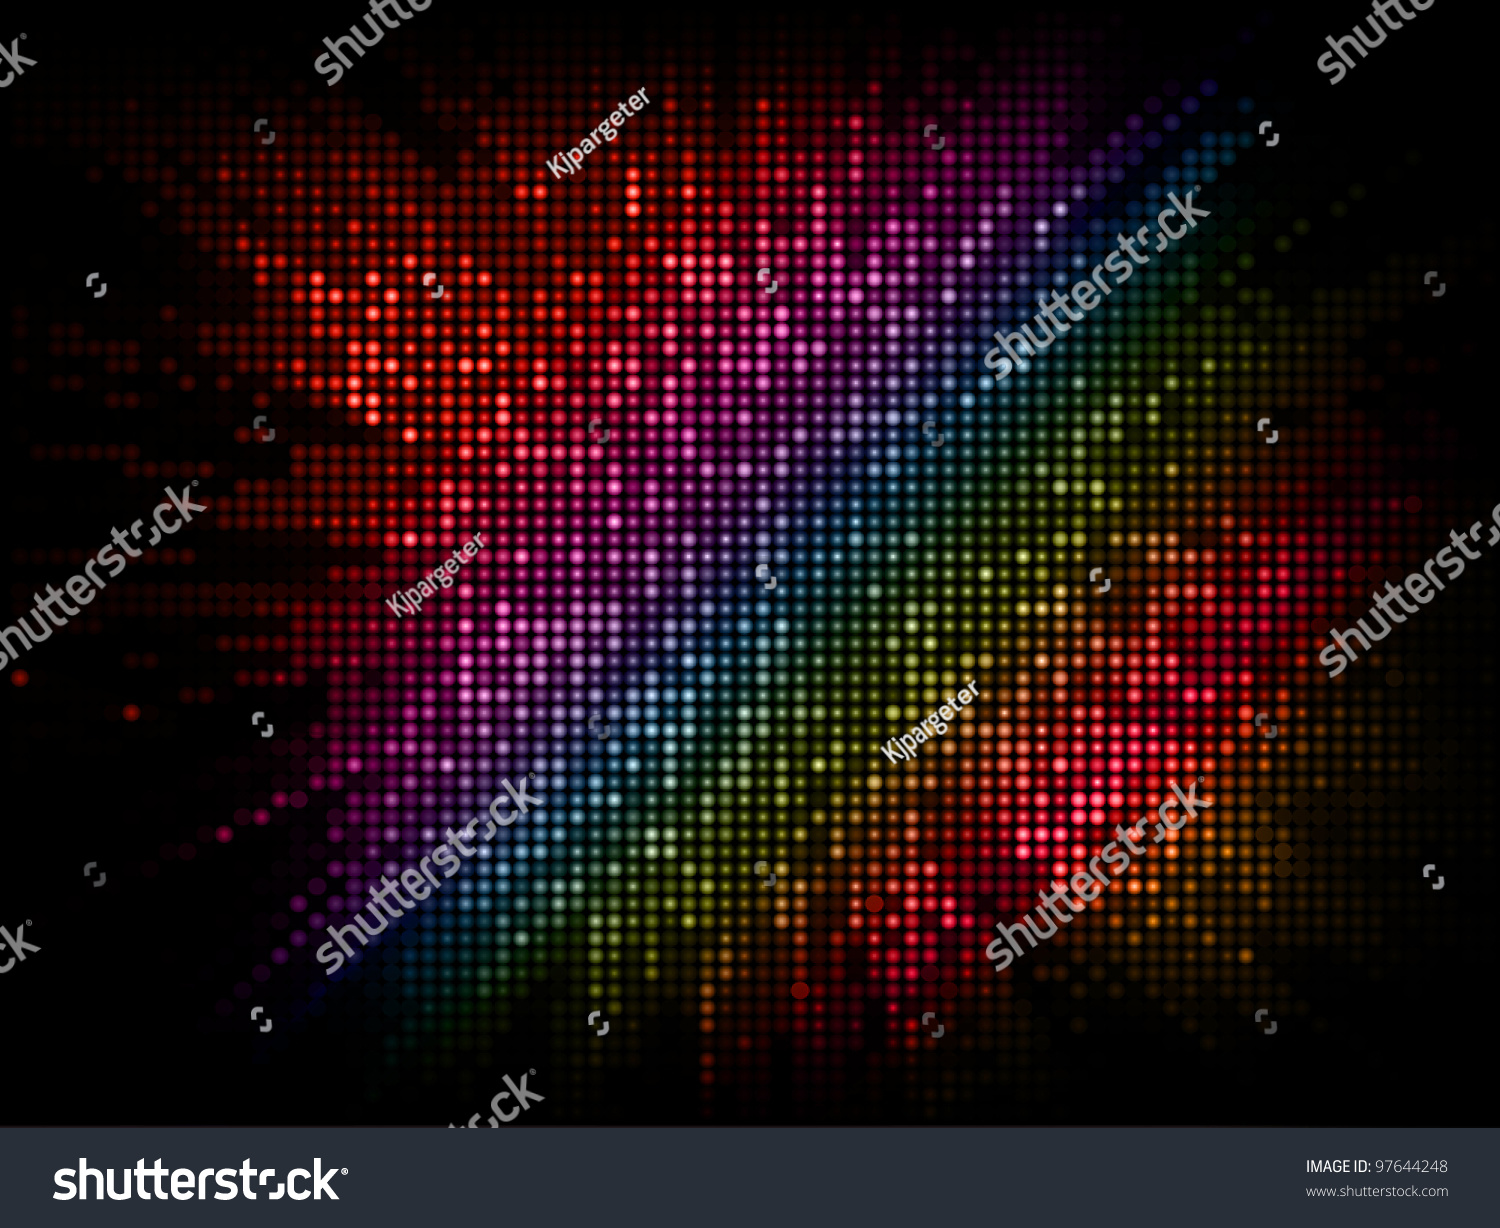 Abstract Background With A Disco Lights Effect Stock Vector ...